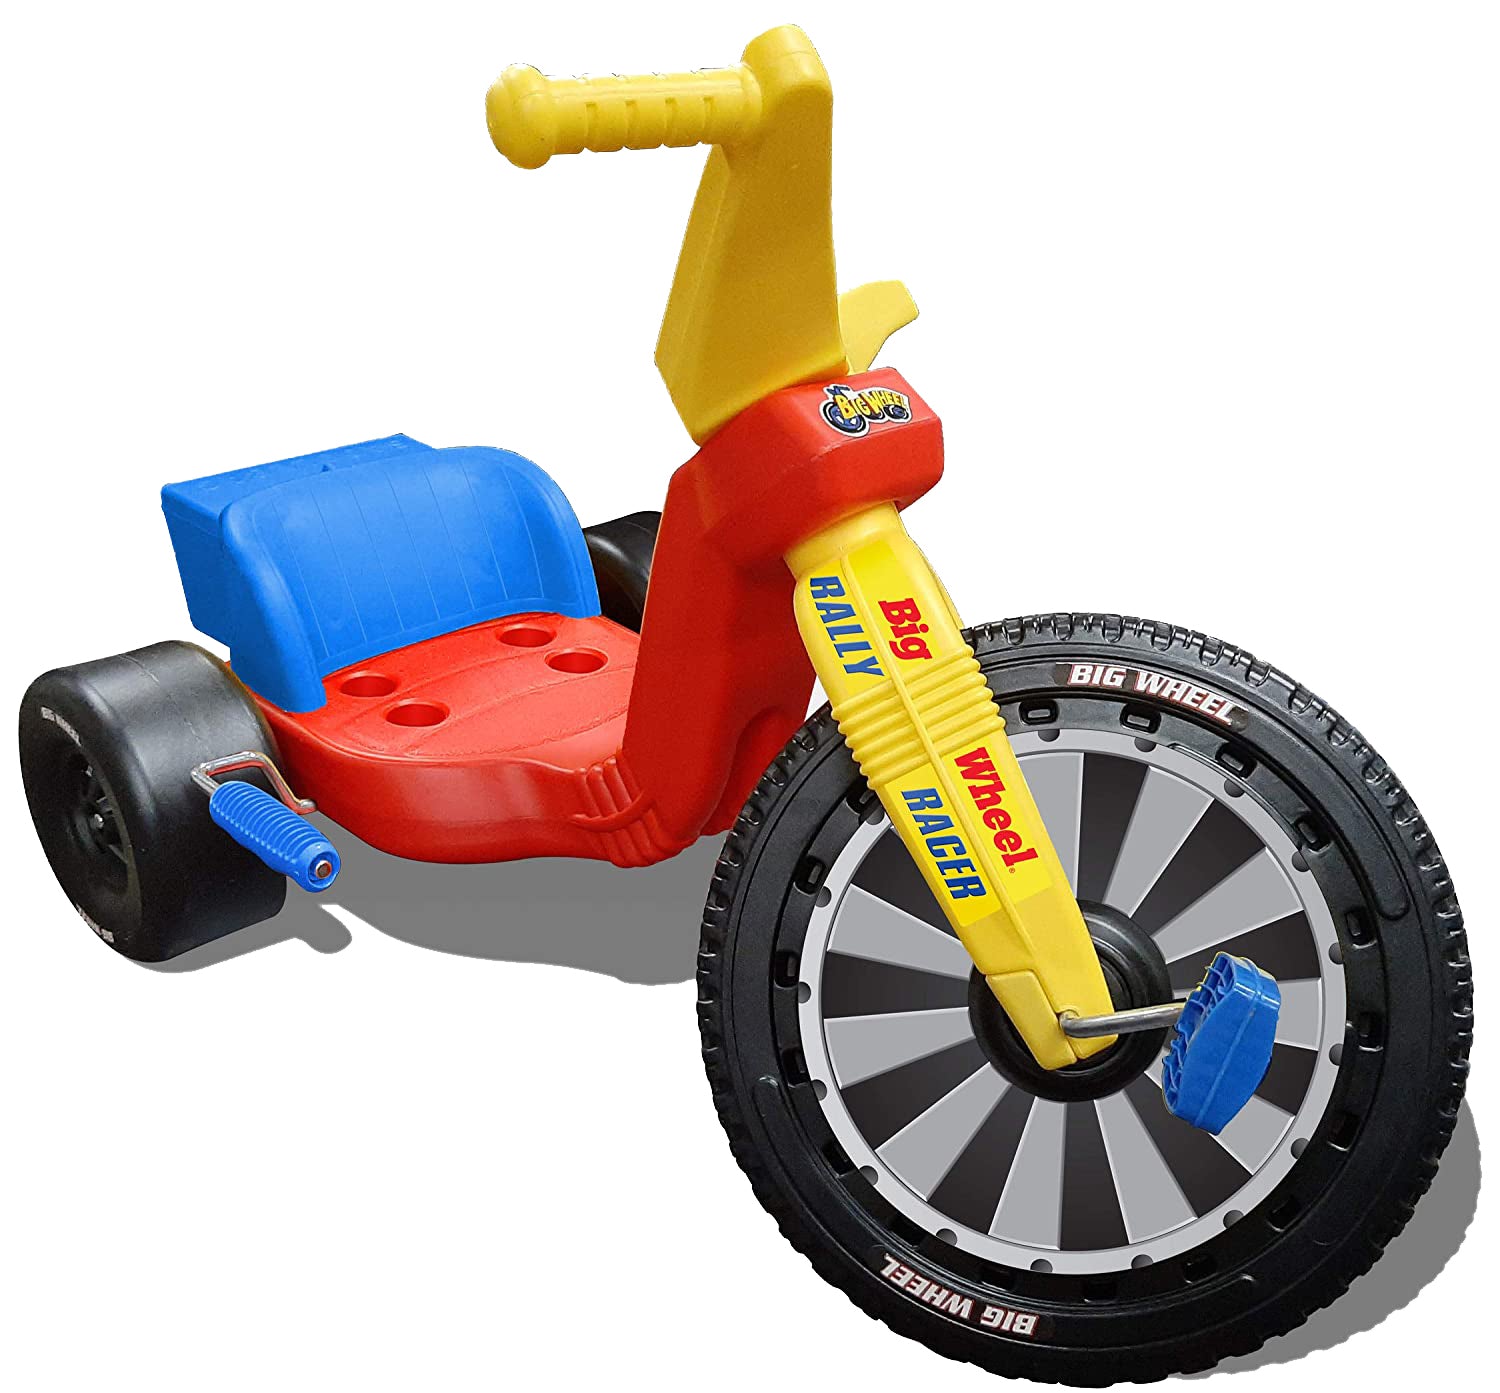 Big Wheel 16 Inch Rally Racer with Spinout Hand Break